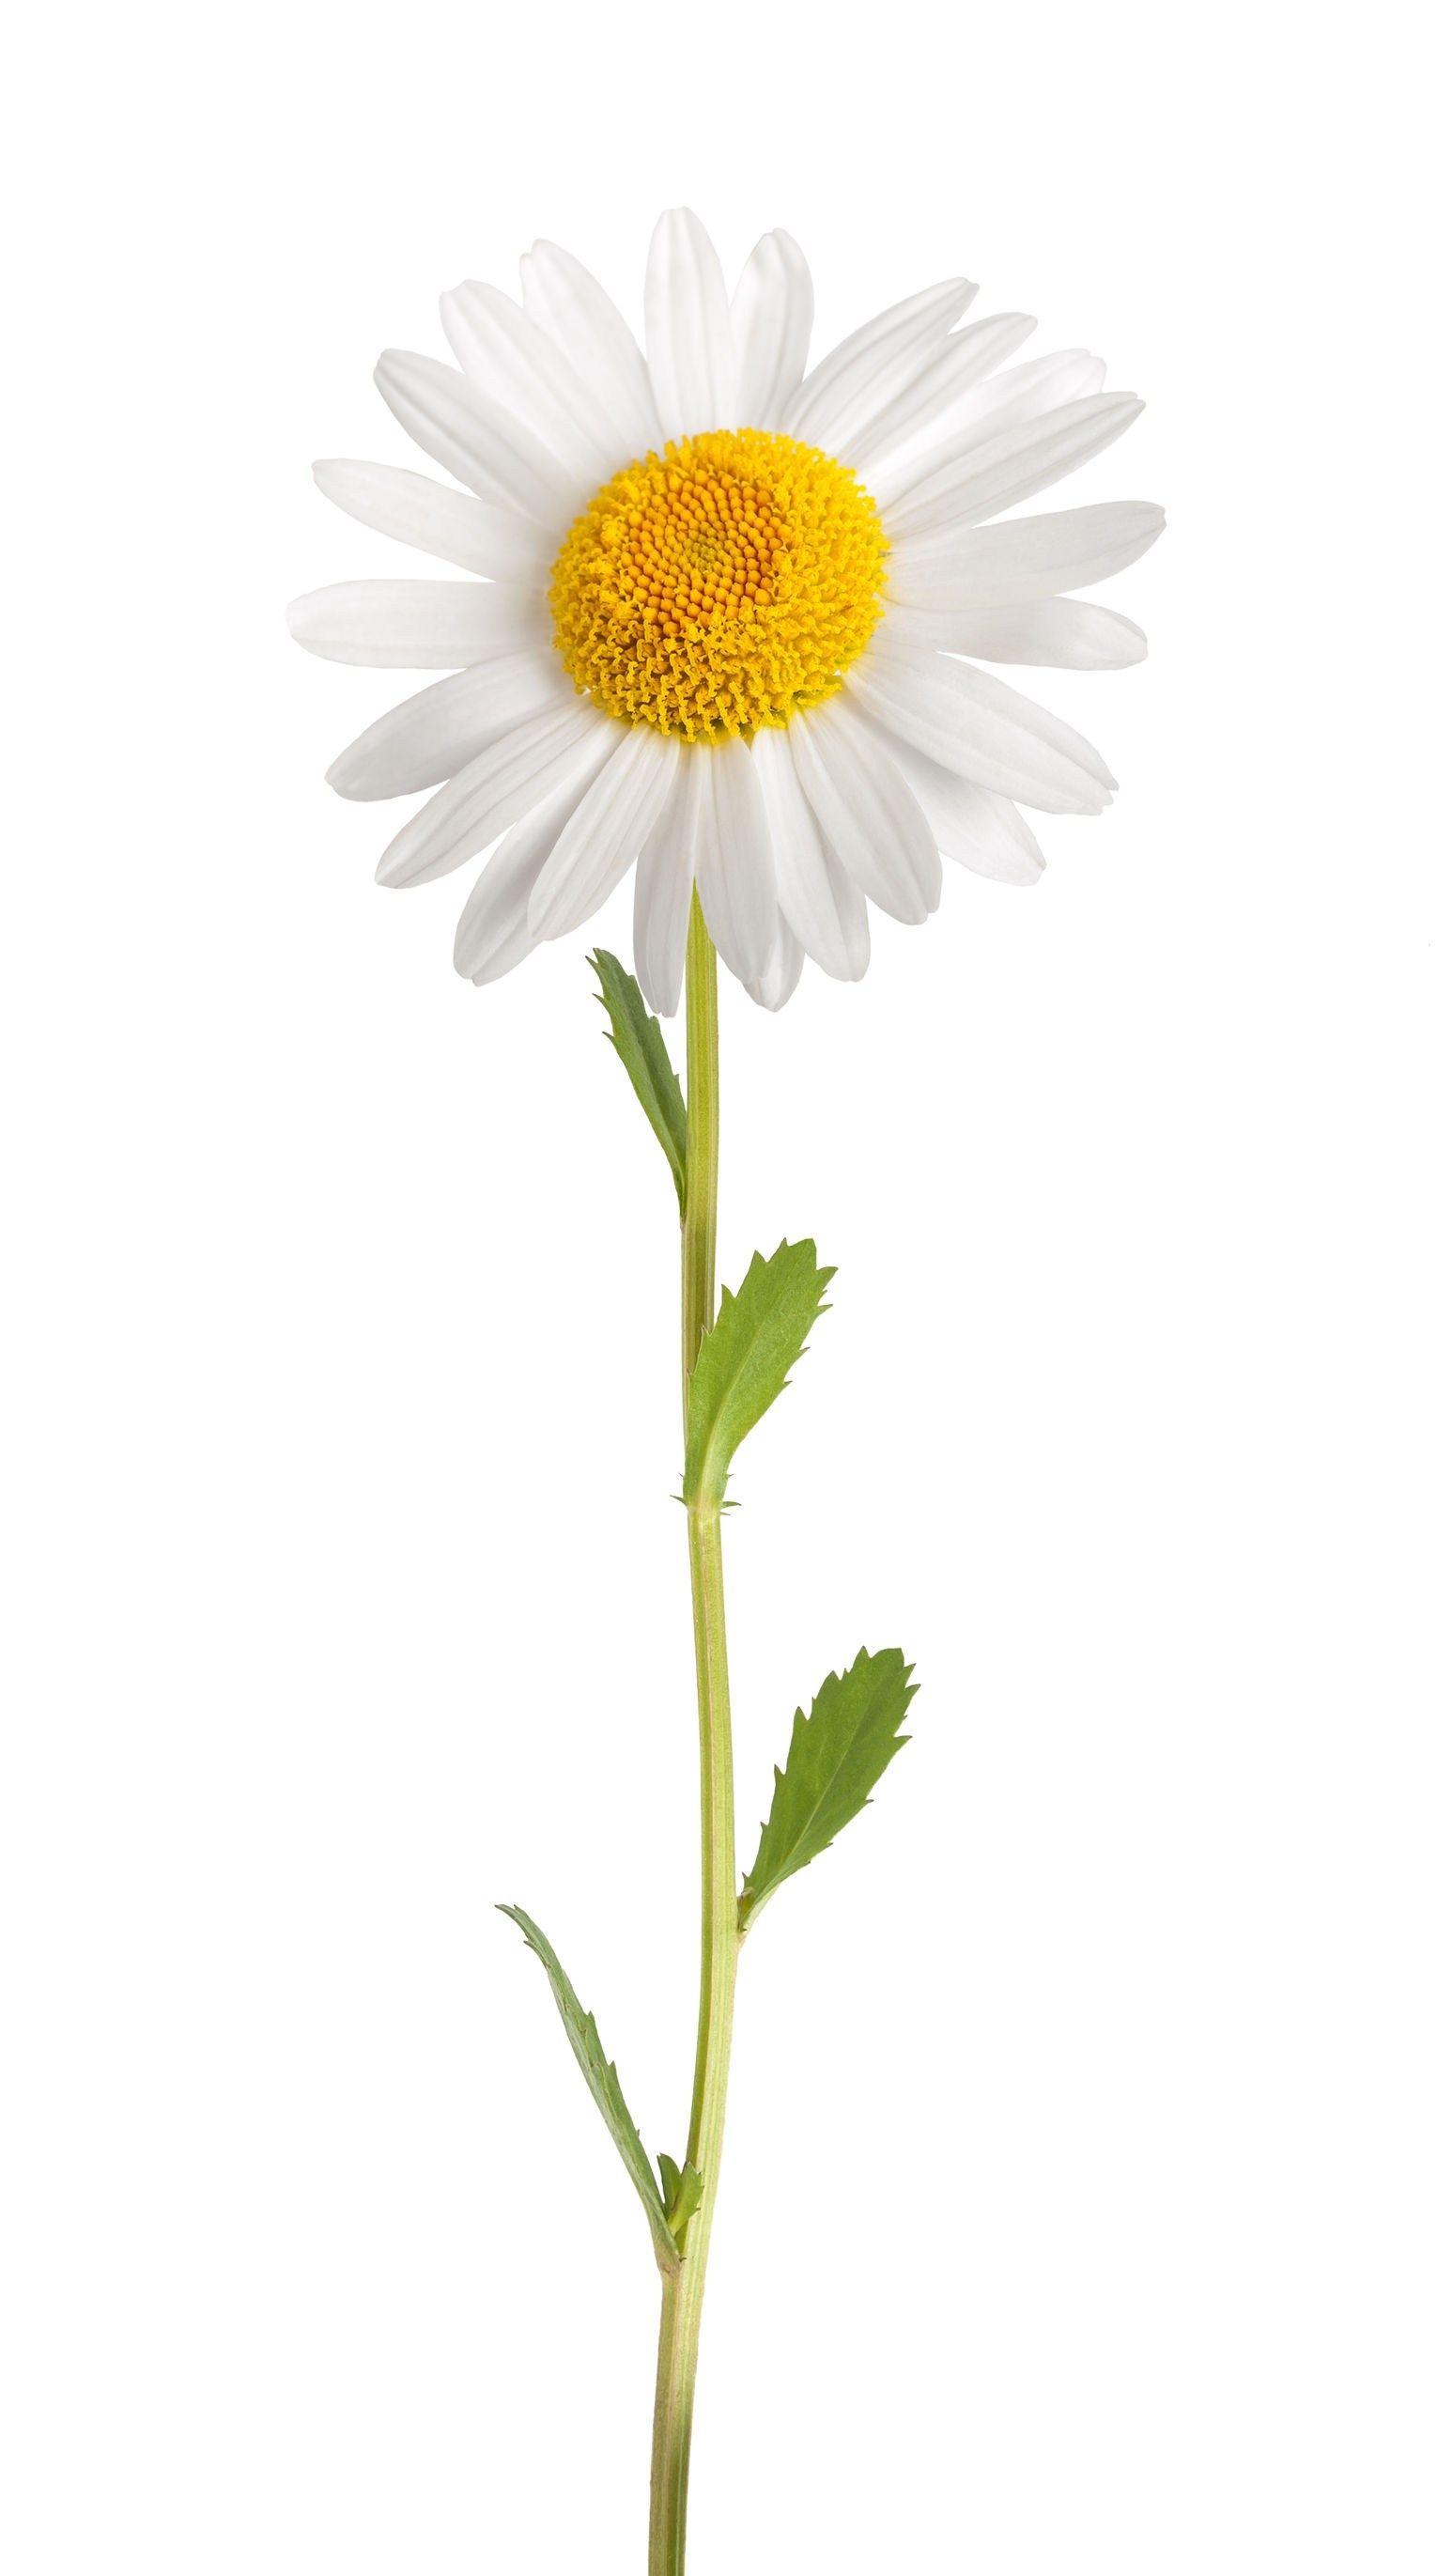 The Power Of Daisy Flower Extract pertaining to Daisy Flower White